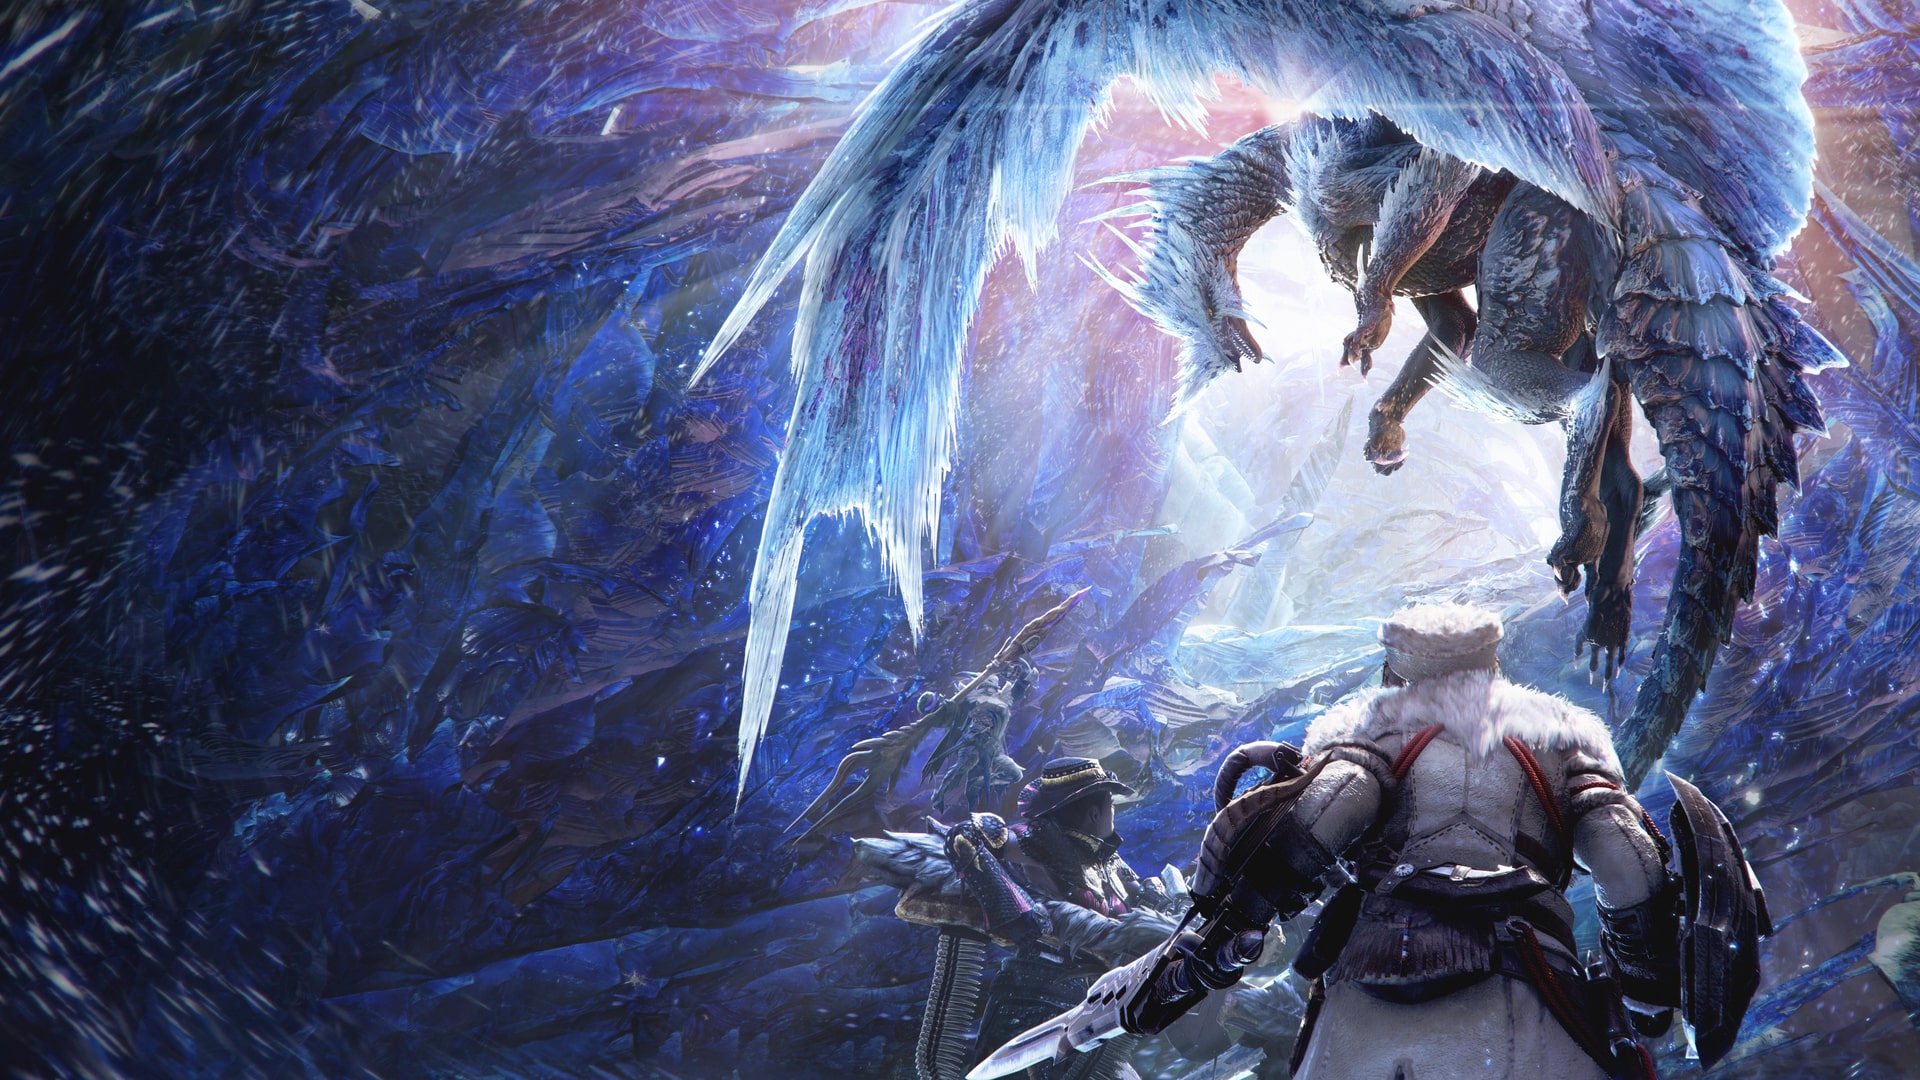 Monster Hunter World: Iceborne Master Edition Digital Deluxe (Simplified Chinese, English, Korean, Japanese, Traditional Chinese)